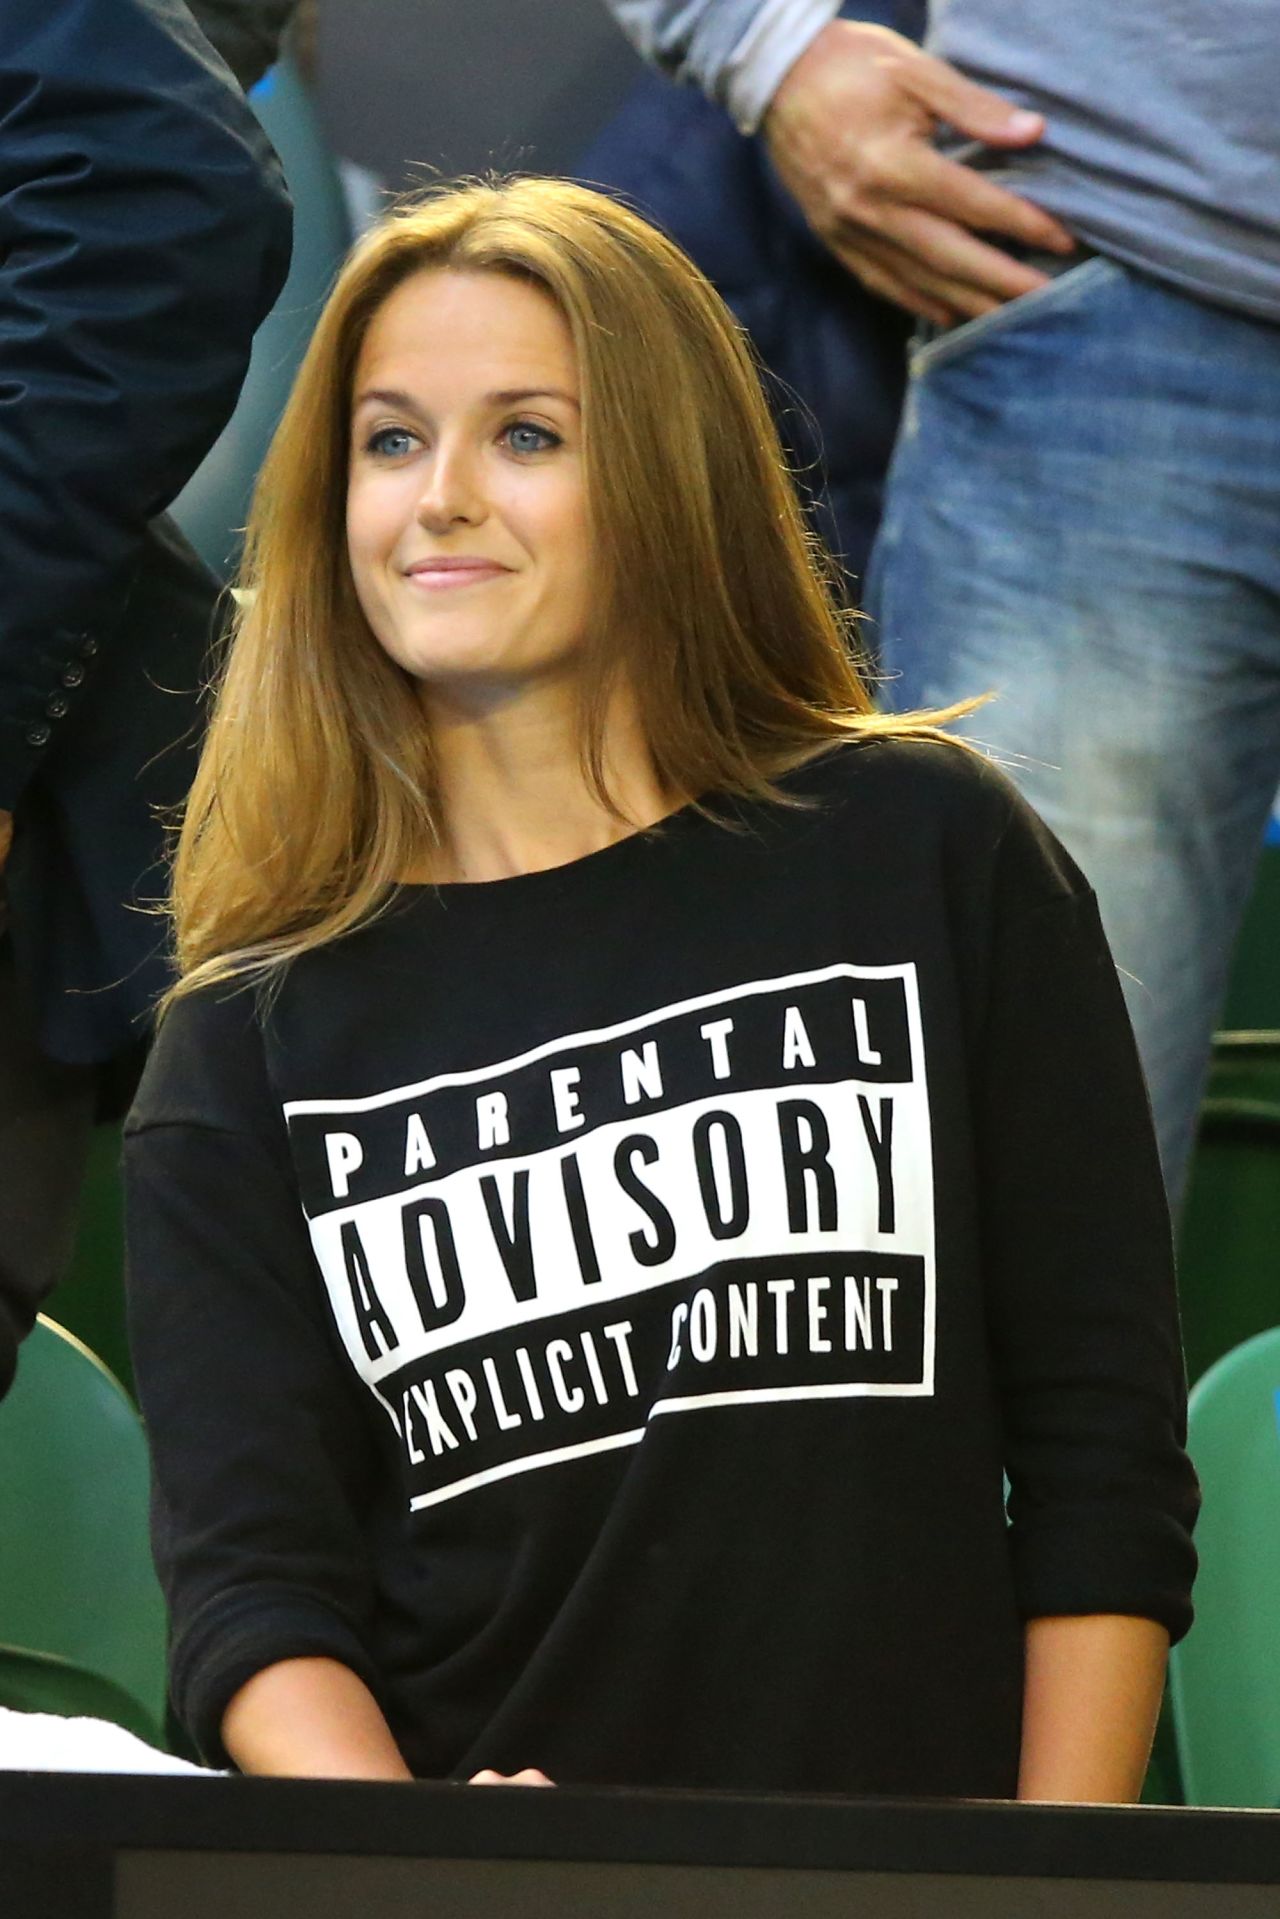 Andy Murray's wife, Kim Sears, wore an "explicit content" top at her husband's at the 2015 Australian Open after cameras caught her allegedly swearing in the stands during an earlier match. They married in April and are now expecting their first child.<br />